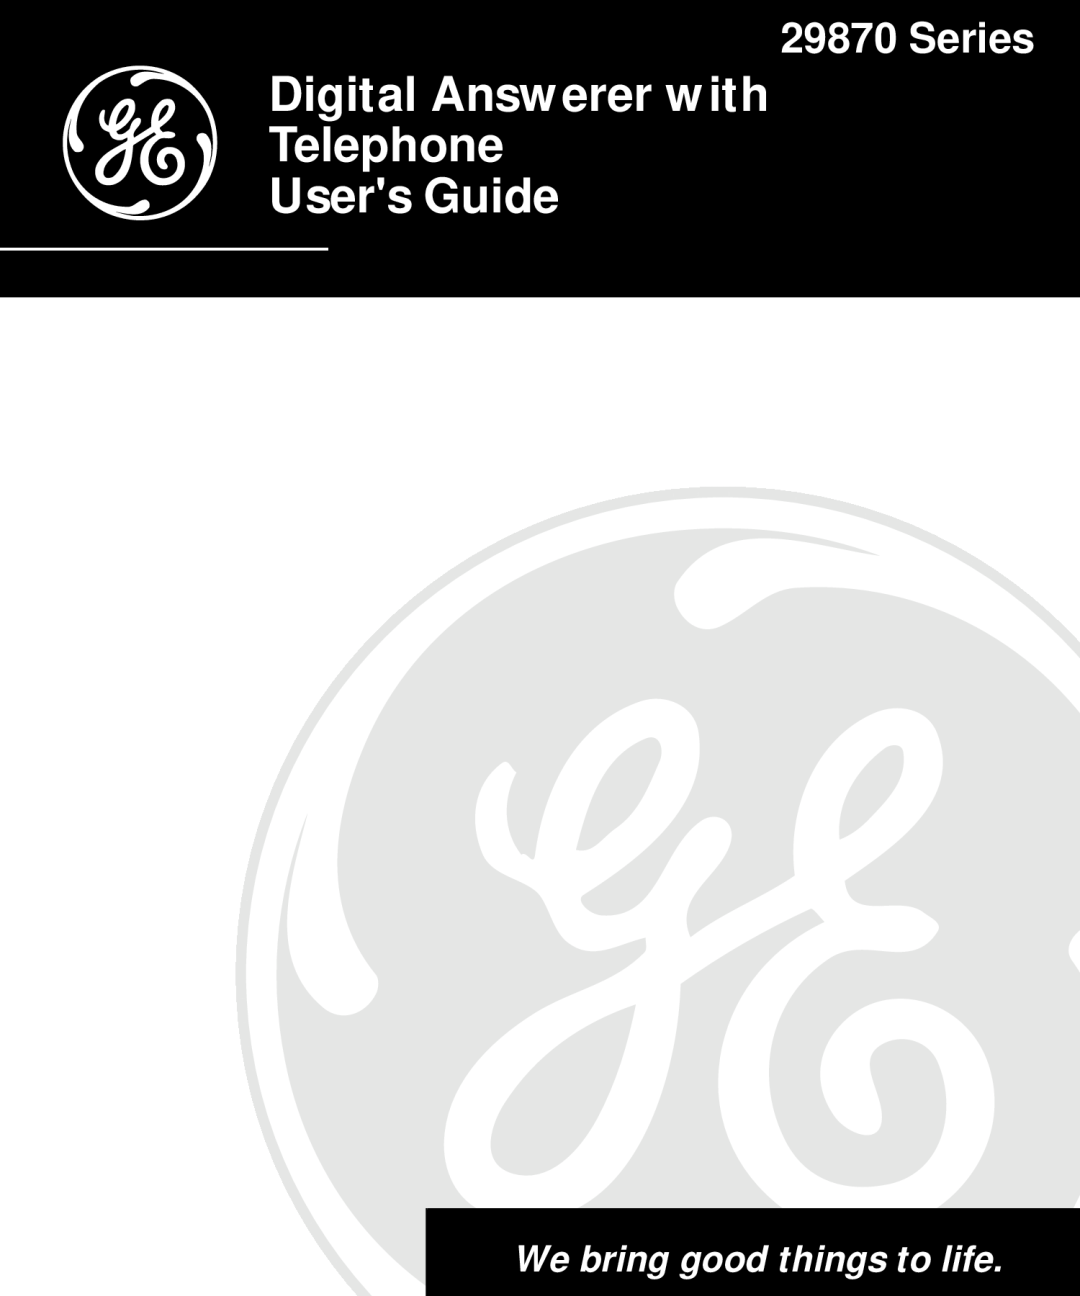 GE 29870 Series manual Digital Answerer with Telephone Users Guide, We bring good things to life 